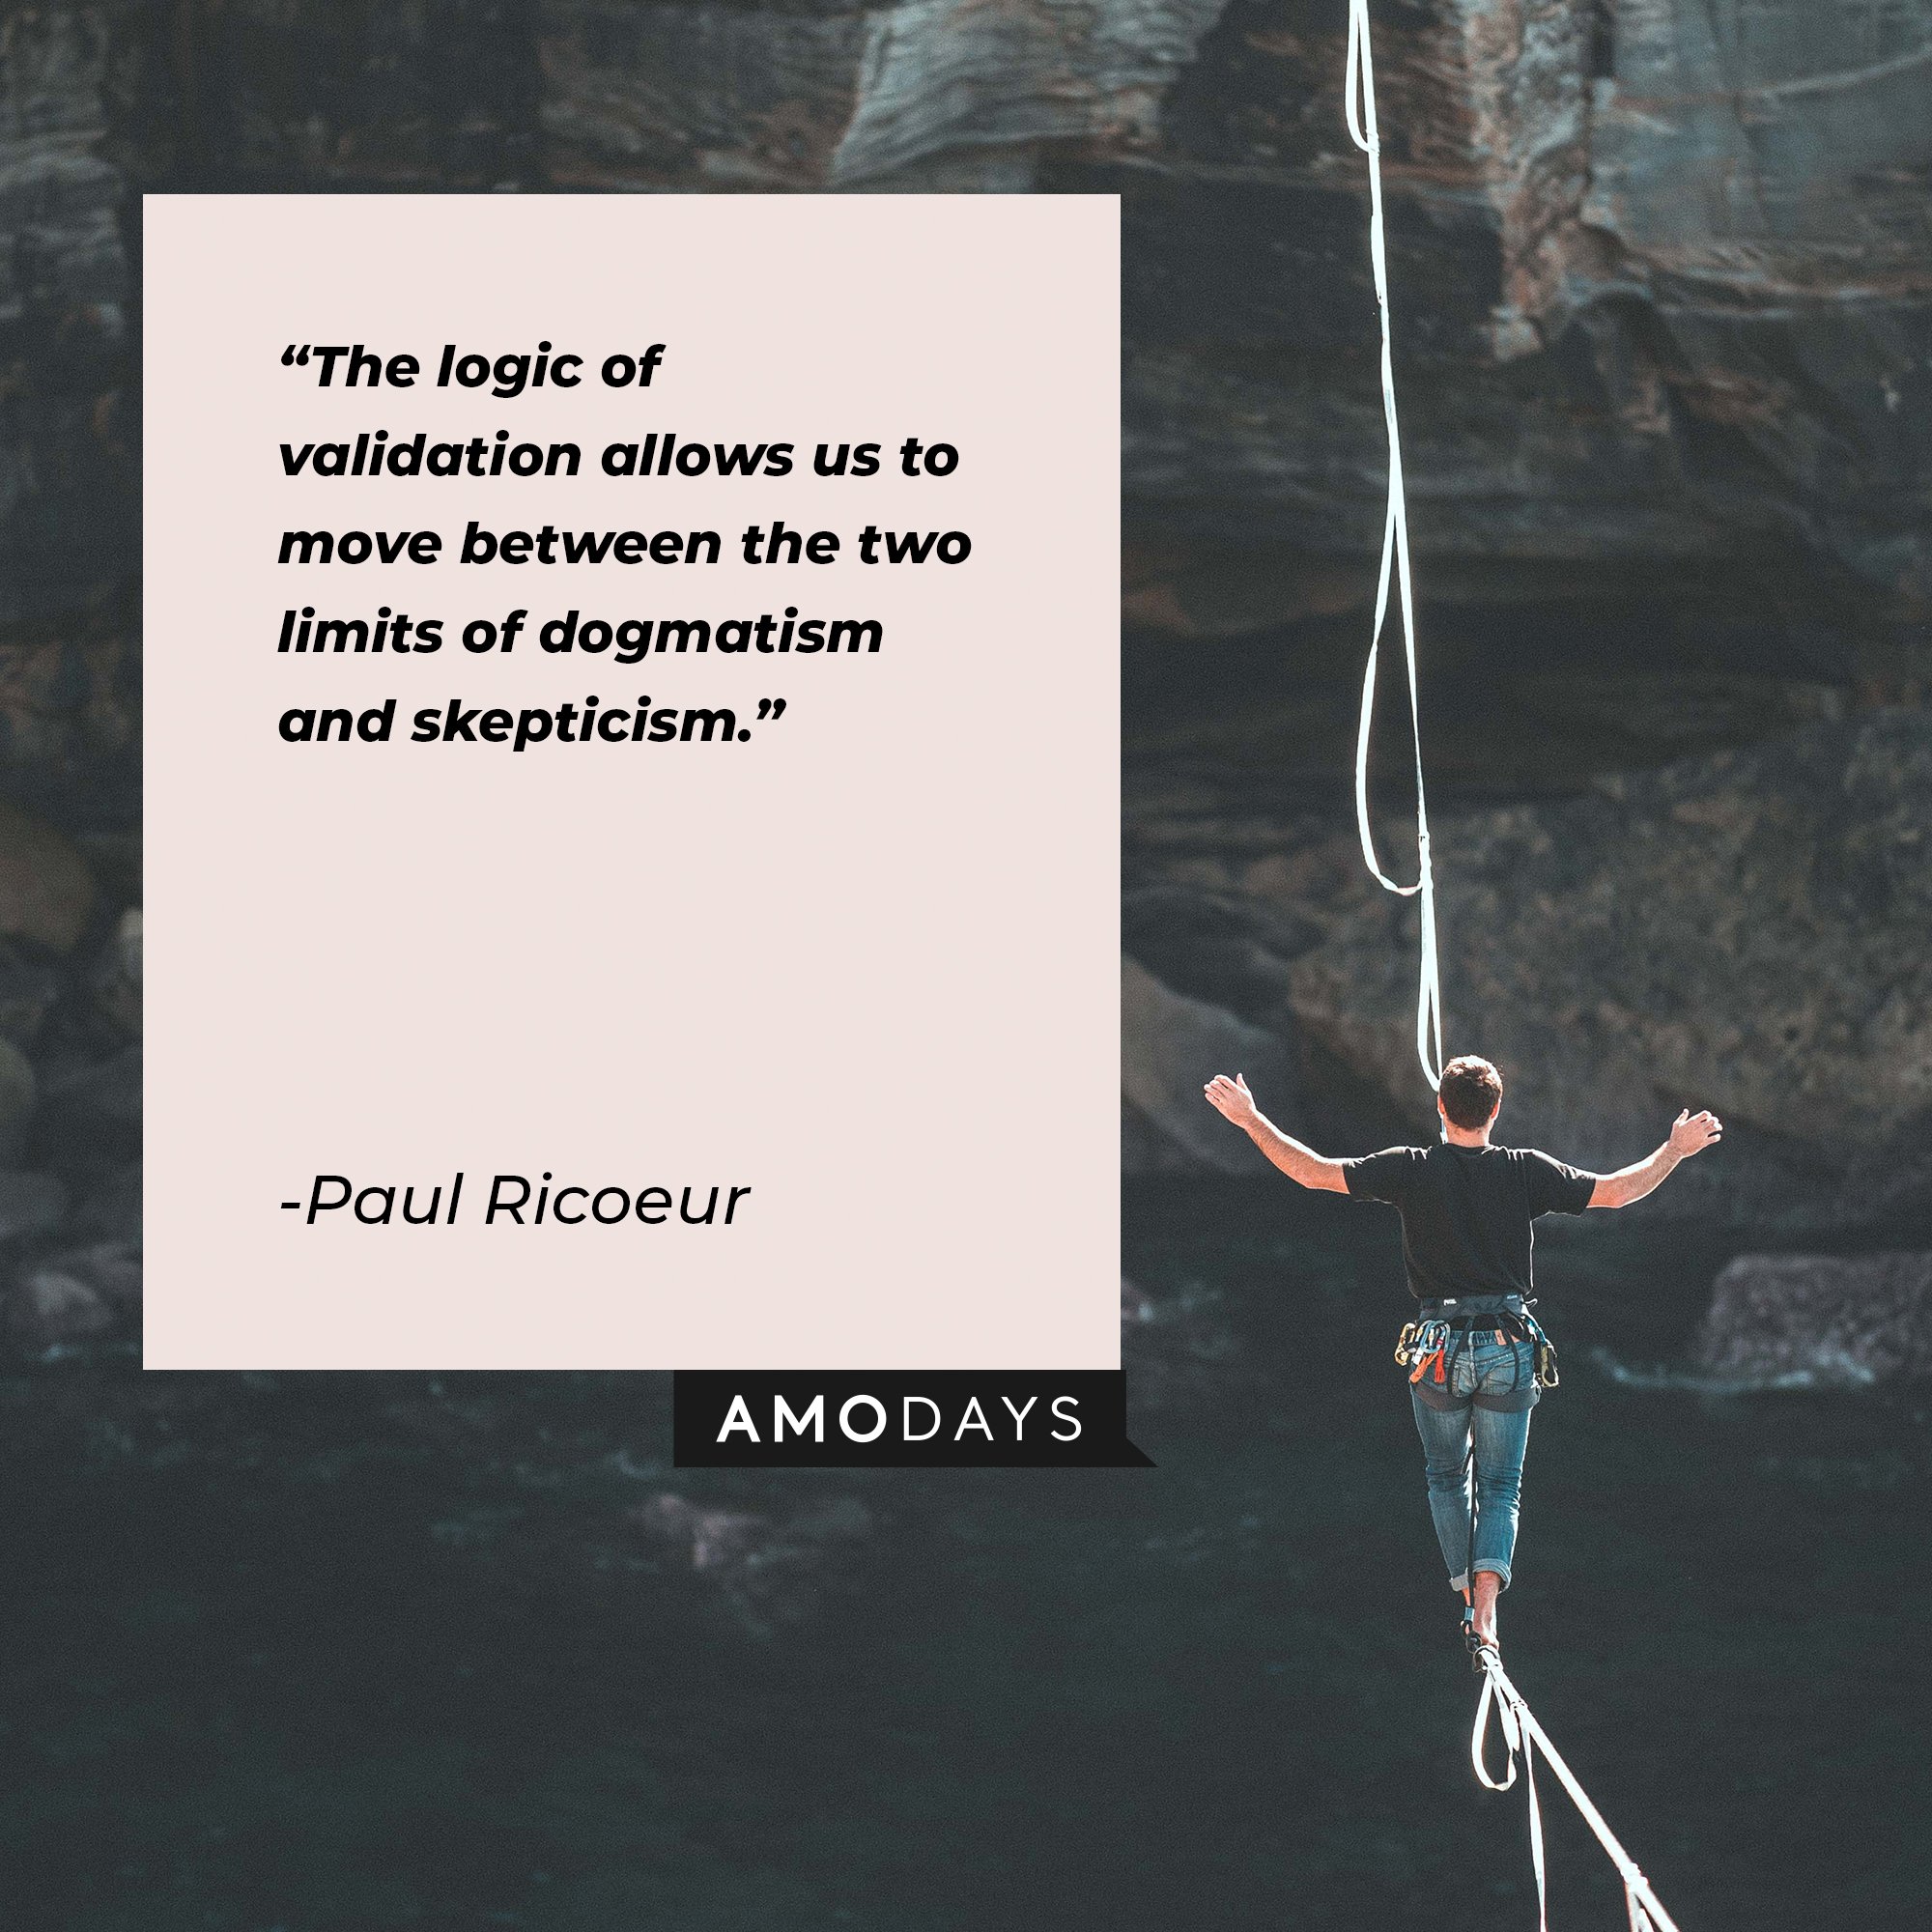 Paul Ricoeur’s quote: "The logic of validation allows us to move between the two limits of dogmatism and skepticism." | Image: AmoDays  